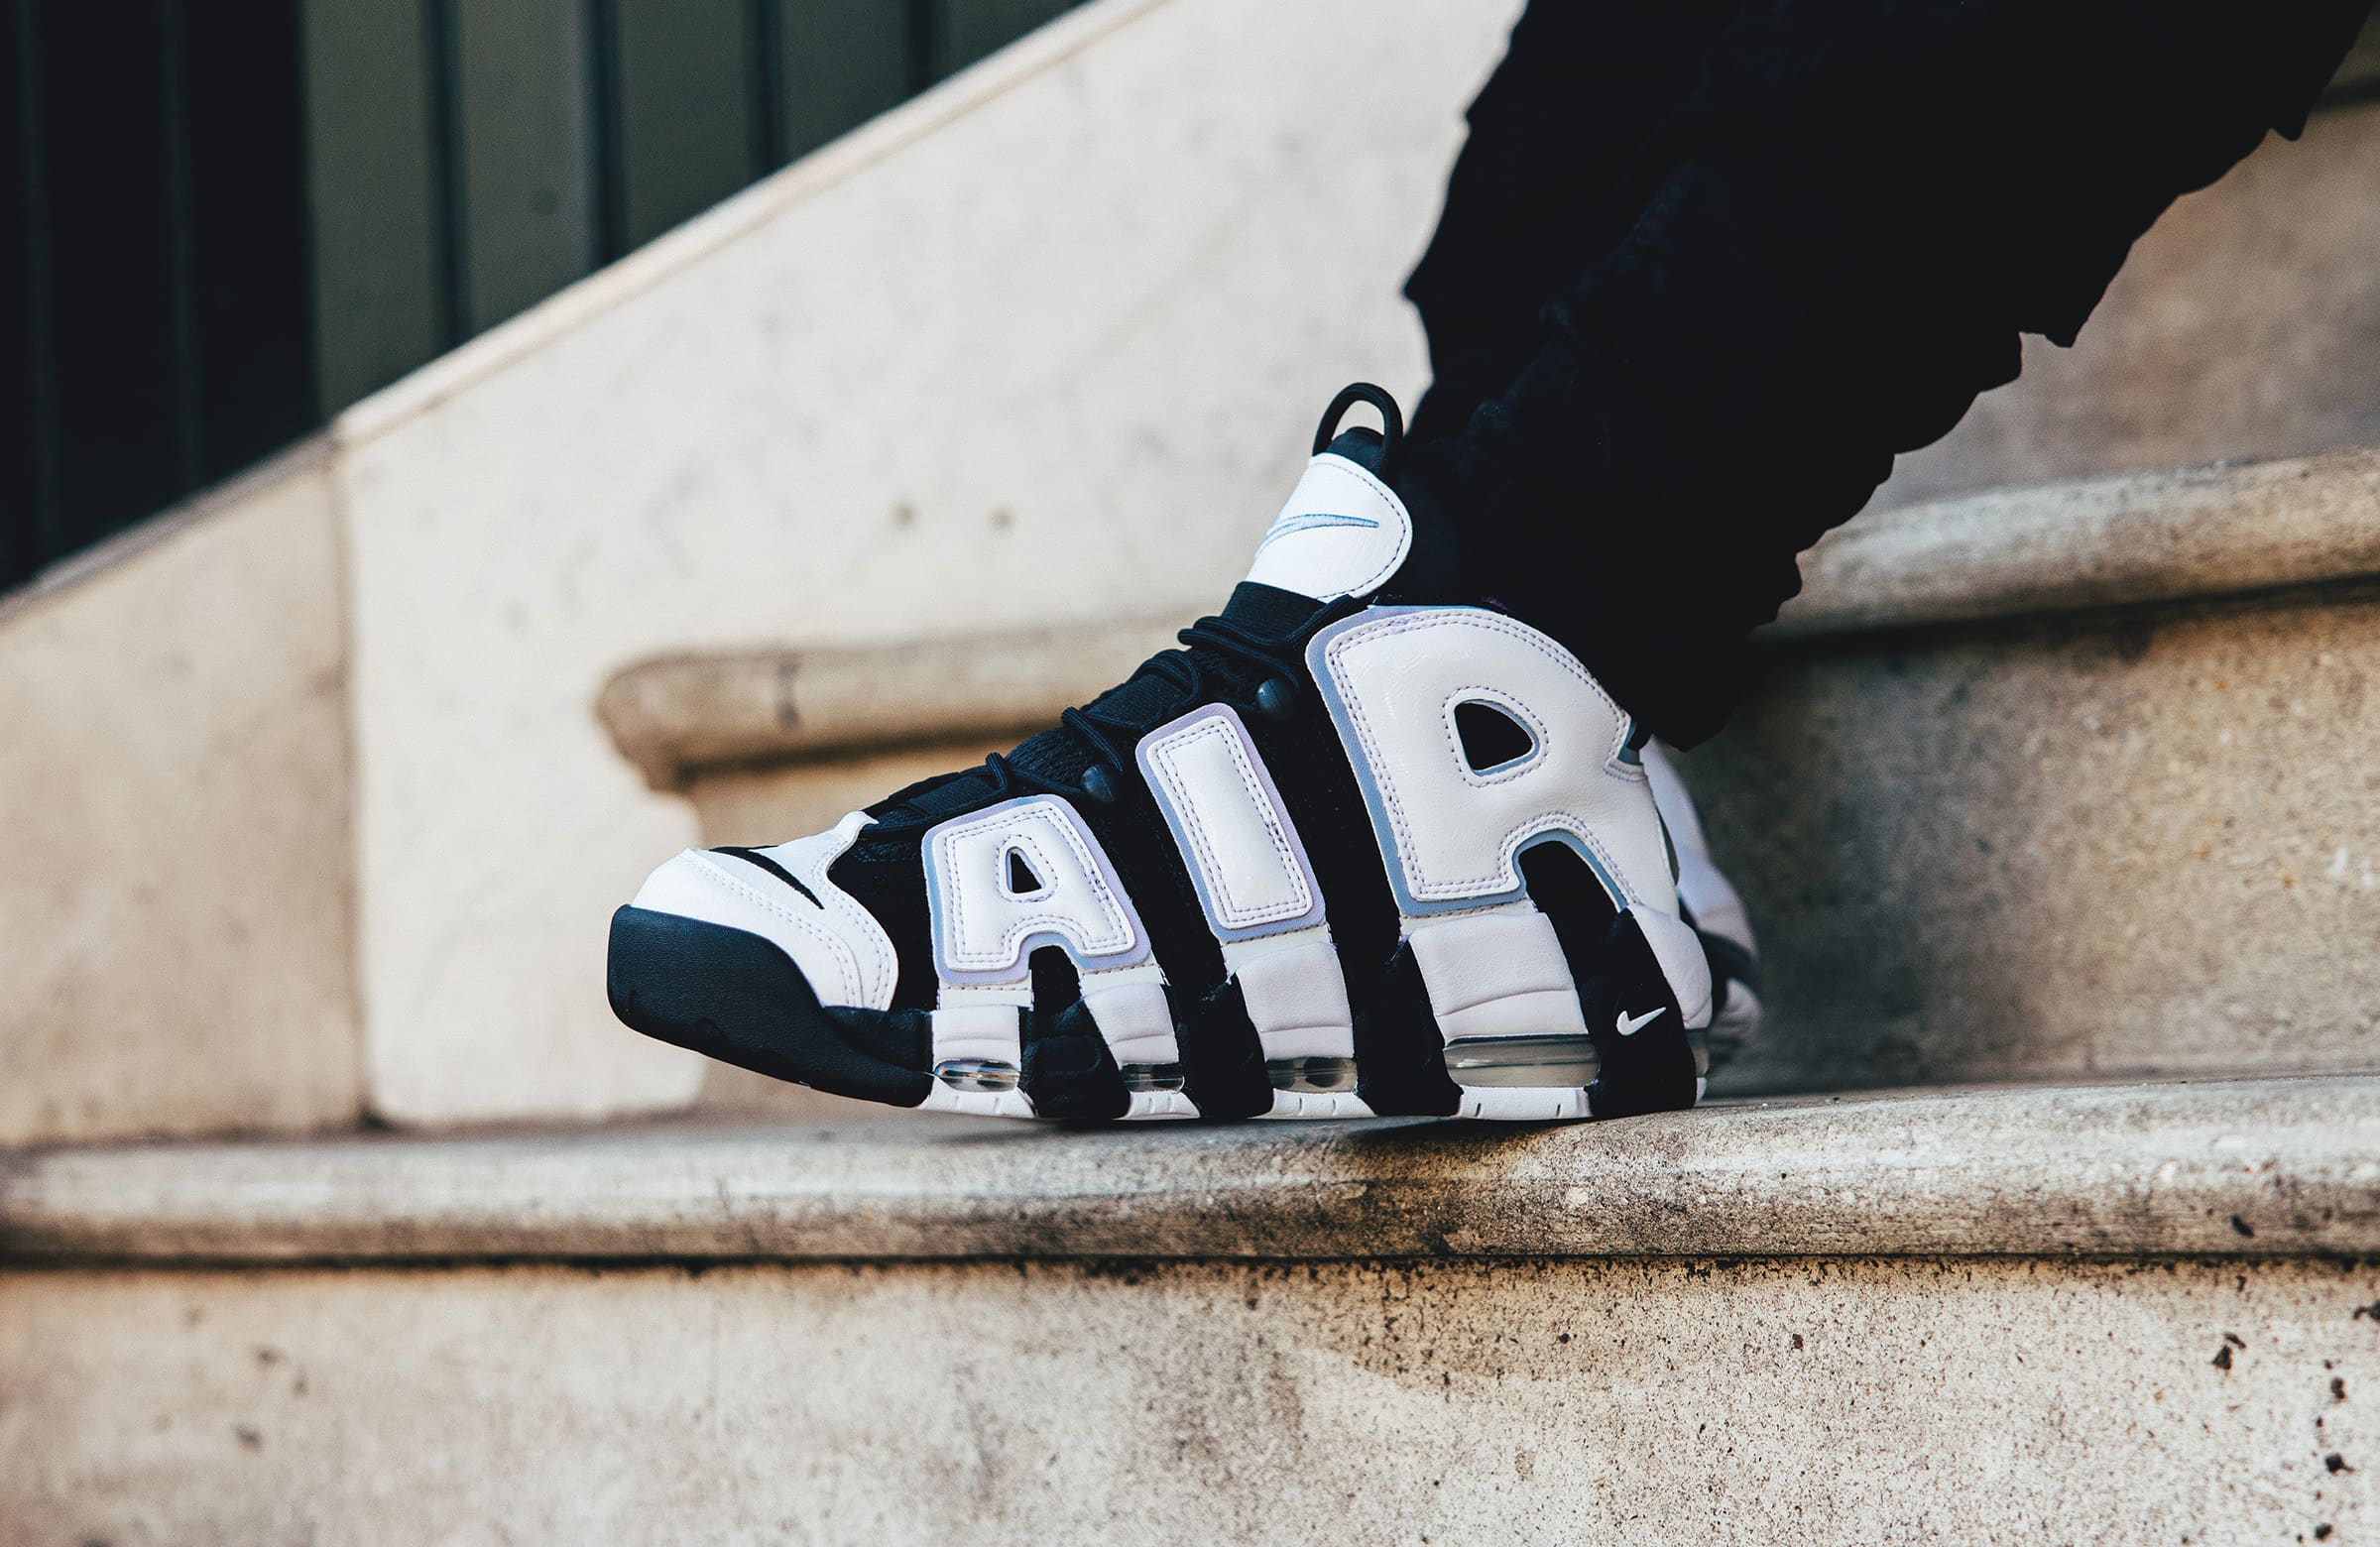 The Nike Air More Uptempo '96 is Back in “Cobalt Bliss” – DTLR